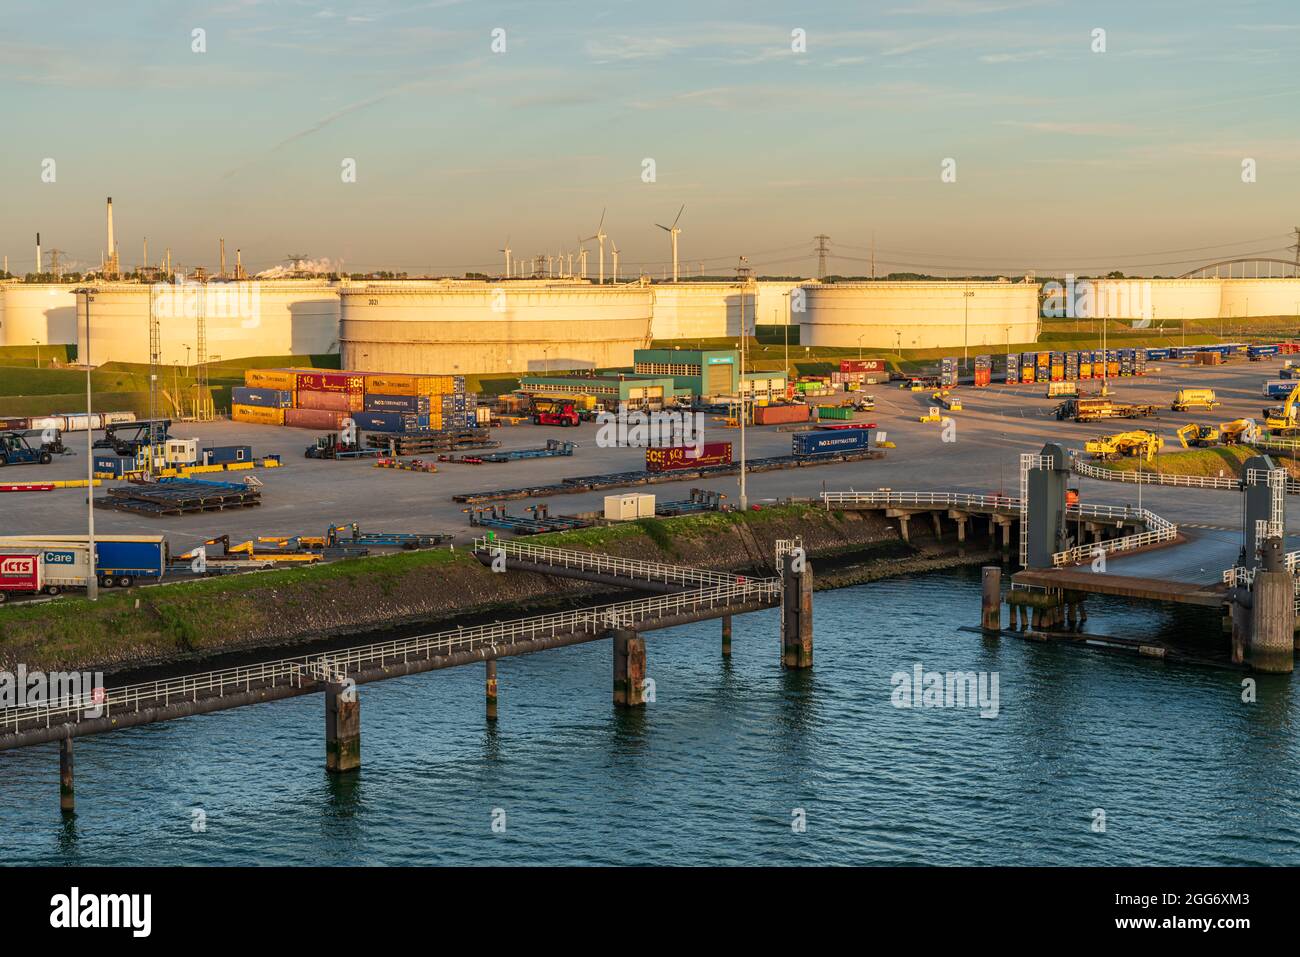 Rotterdam, South Holland, Netherlands - May 13, 2019: Industry and the ferry terminal in the Beneluxhaven of Europoort Stock Photo